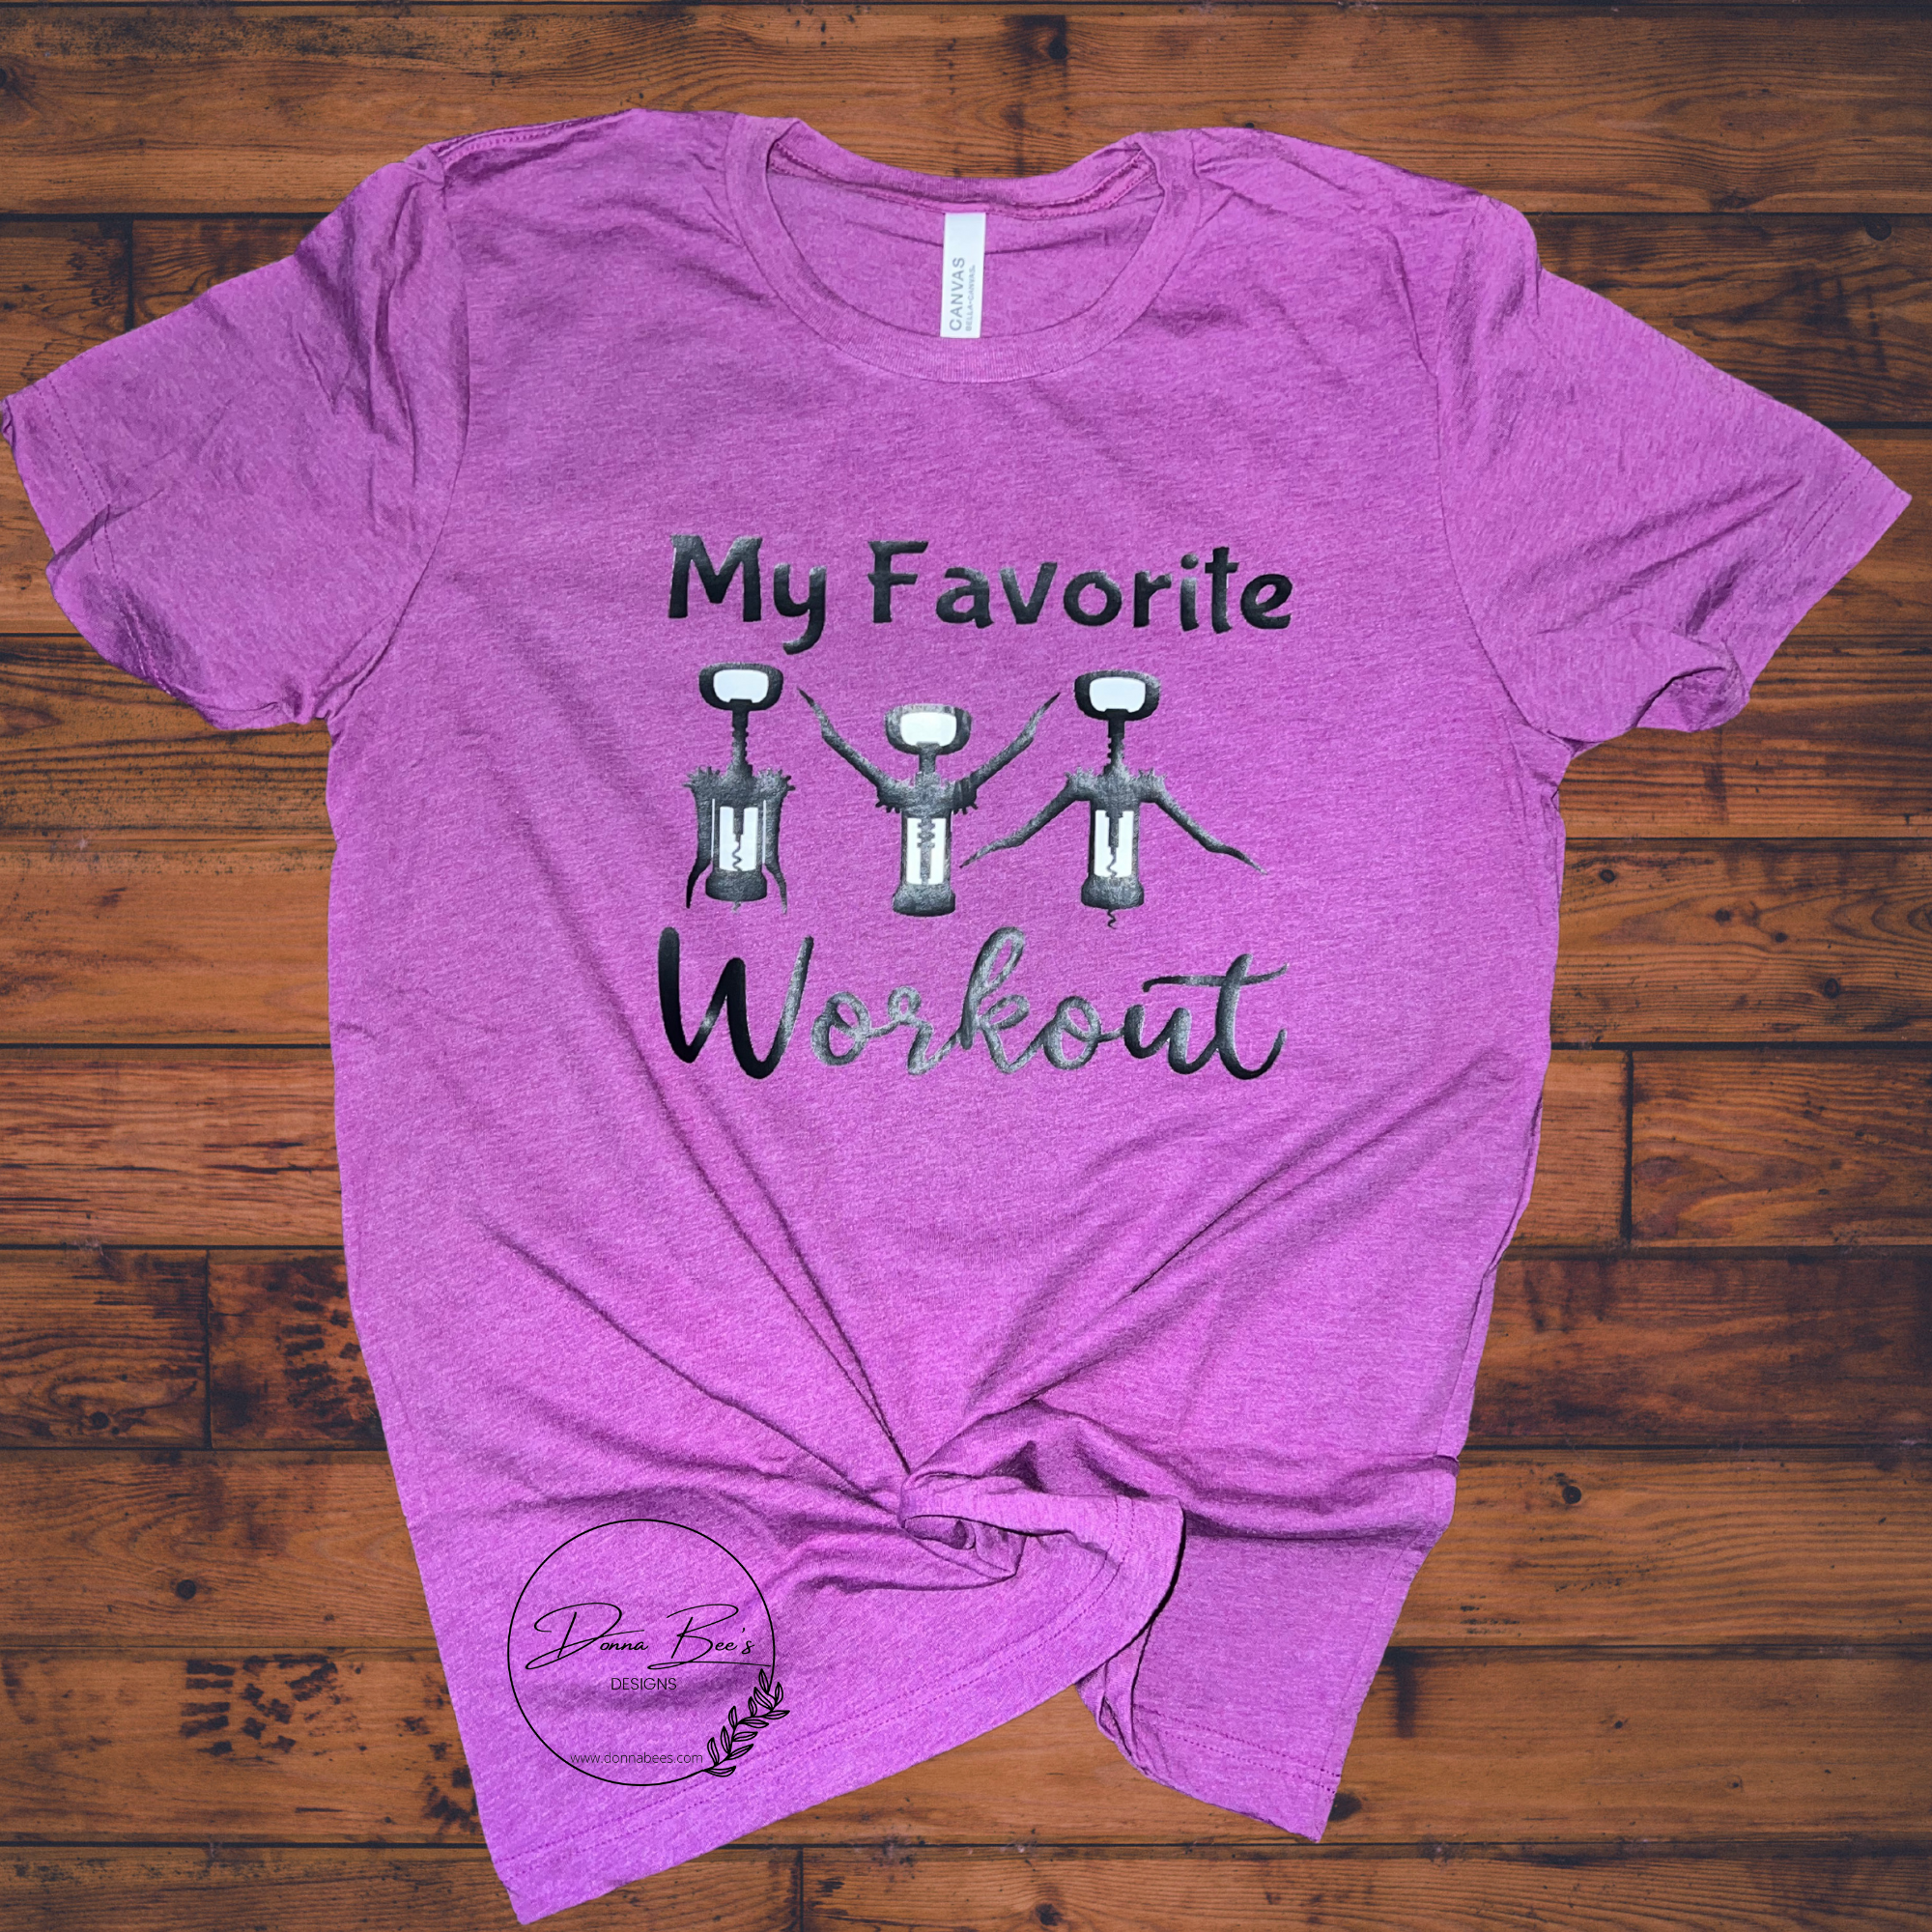 My Favorite Workout | Wine lovers tshirt |